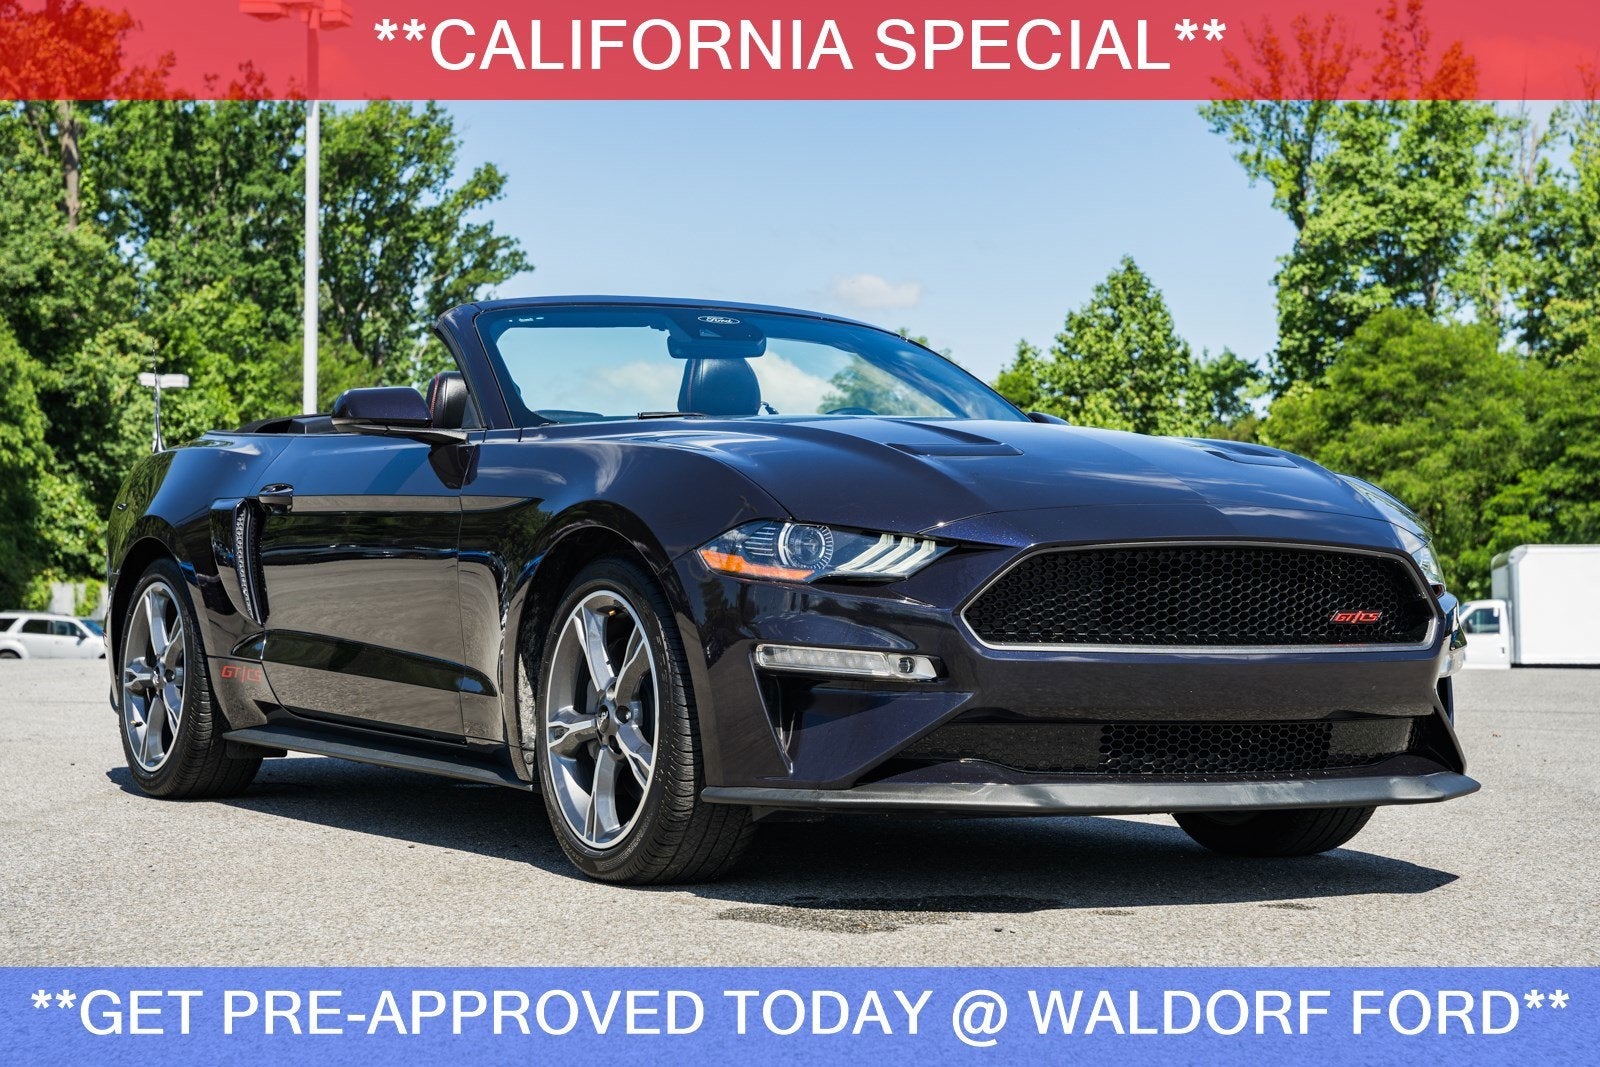 2022 Ford Mustang GT Premium **California Special**